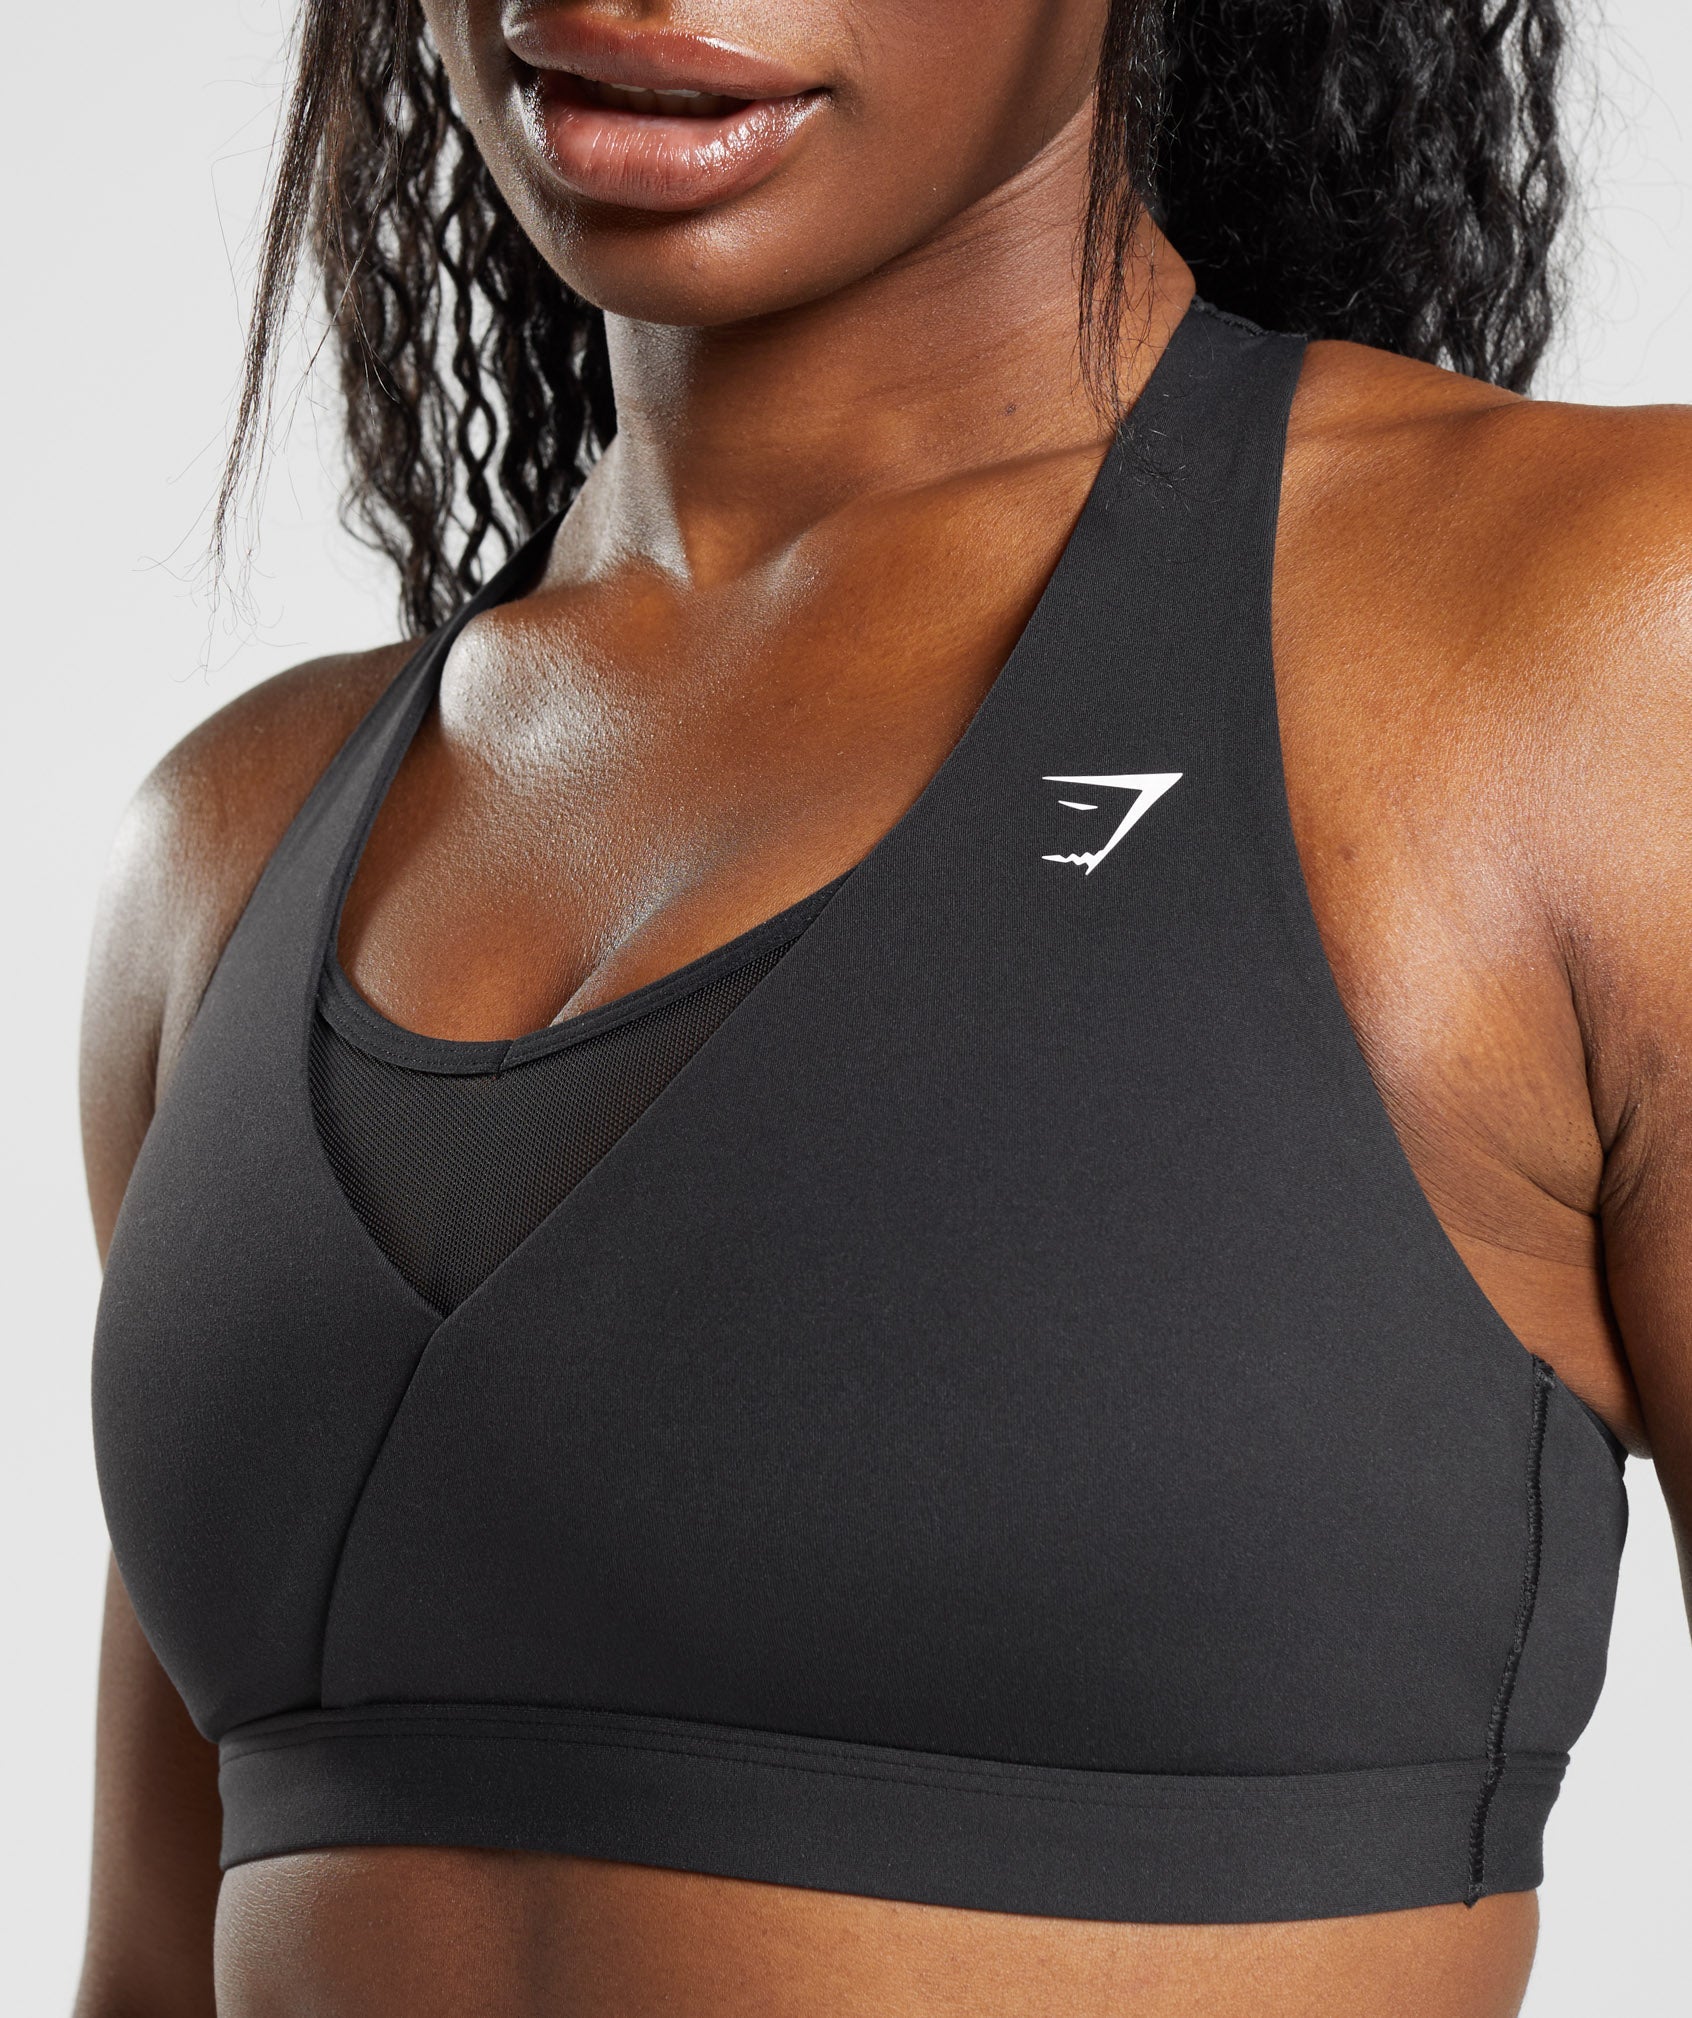 The Gymshark Sports Bra: A Fusion of Comfort, Style, and Performance -  Gymfluencers